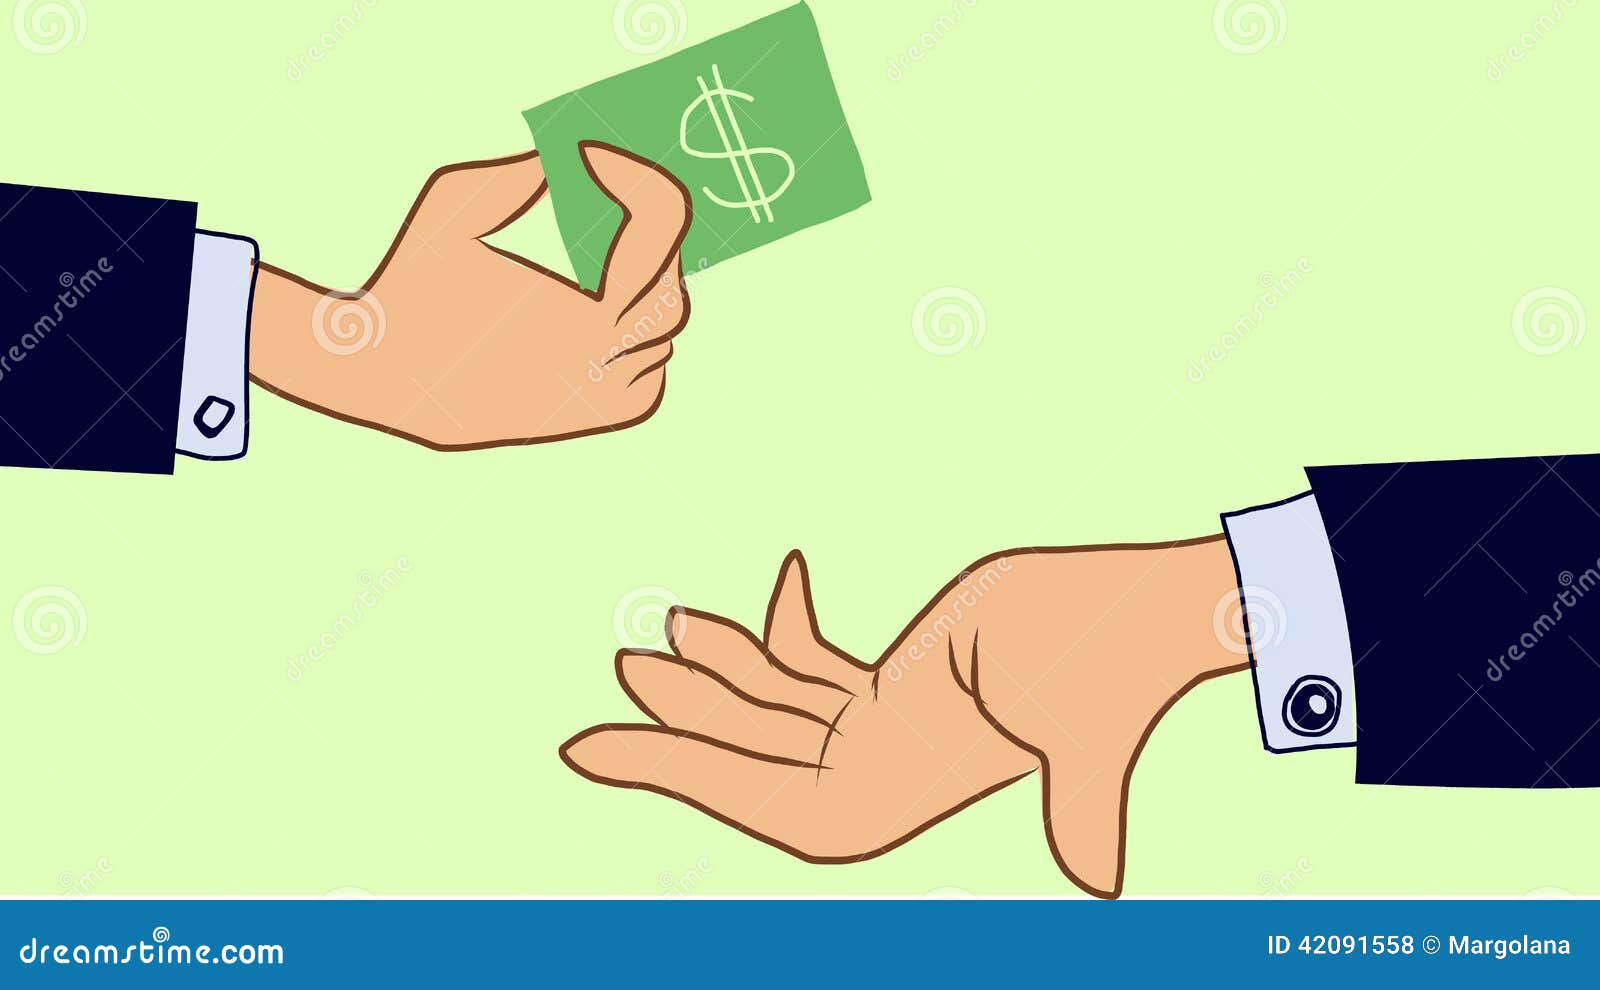 clipart giving money - photo #27